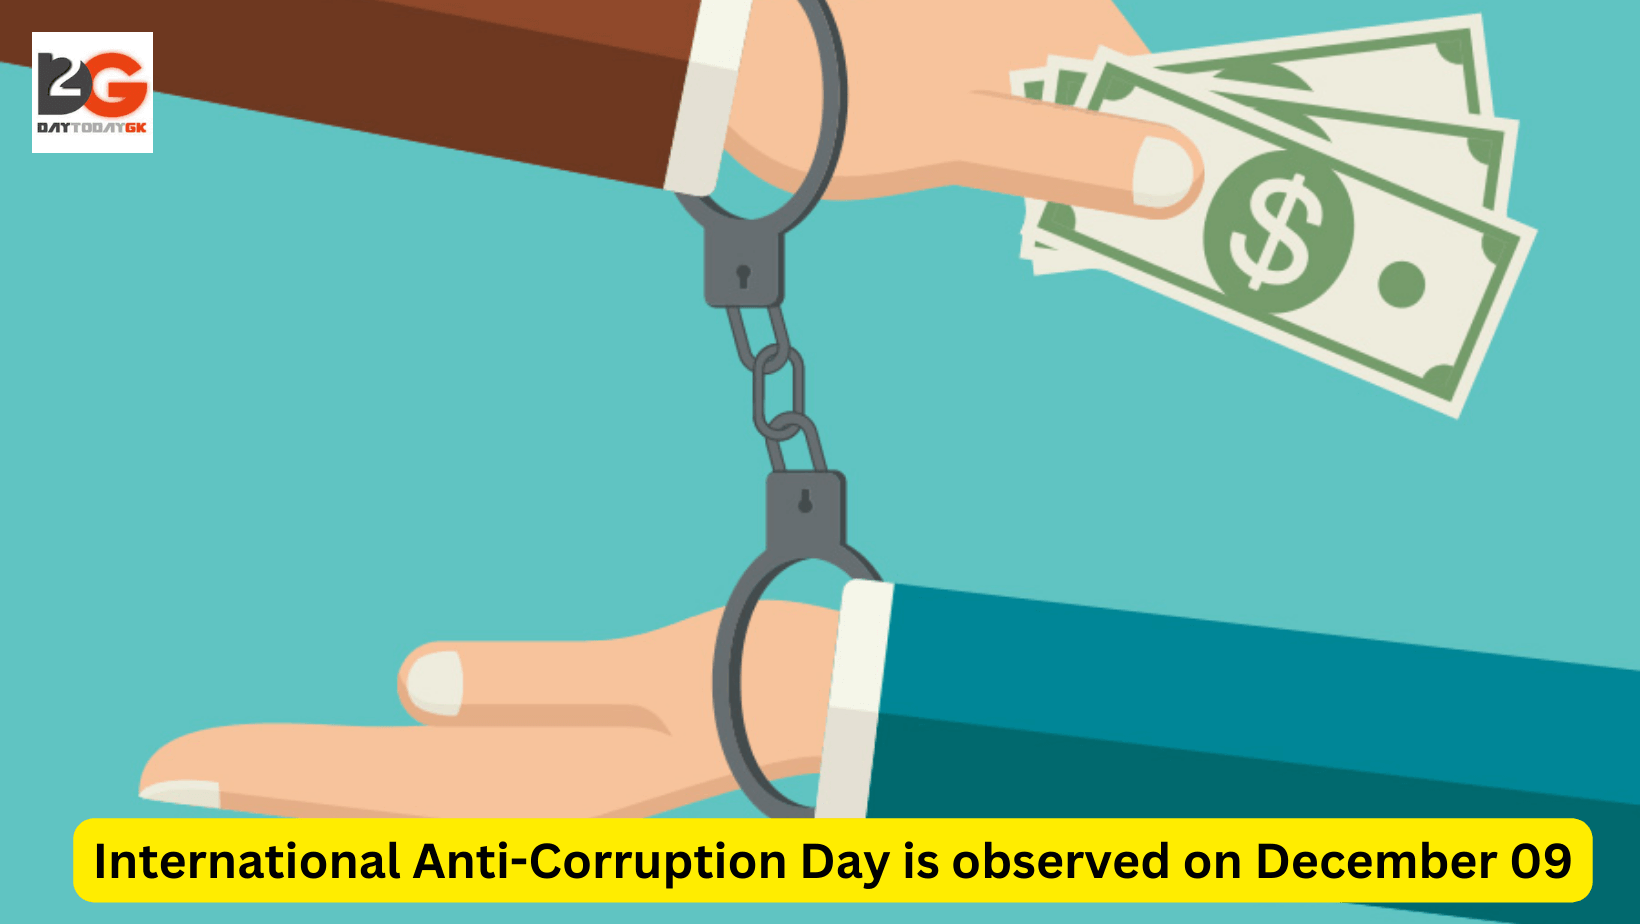 International Anti-Corruption Day is observed on December 09